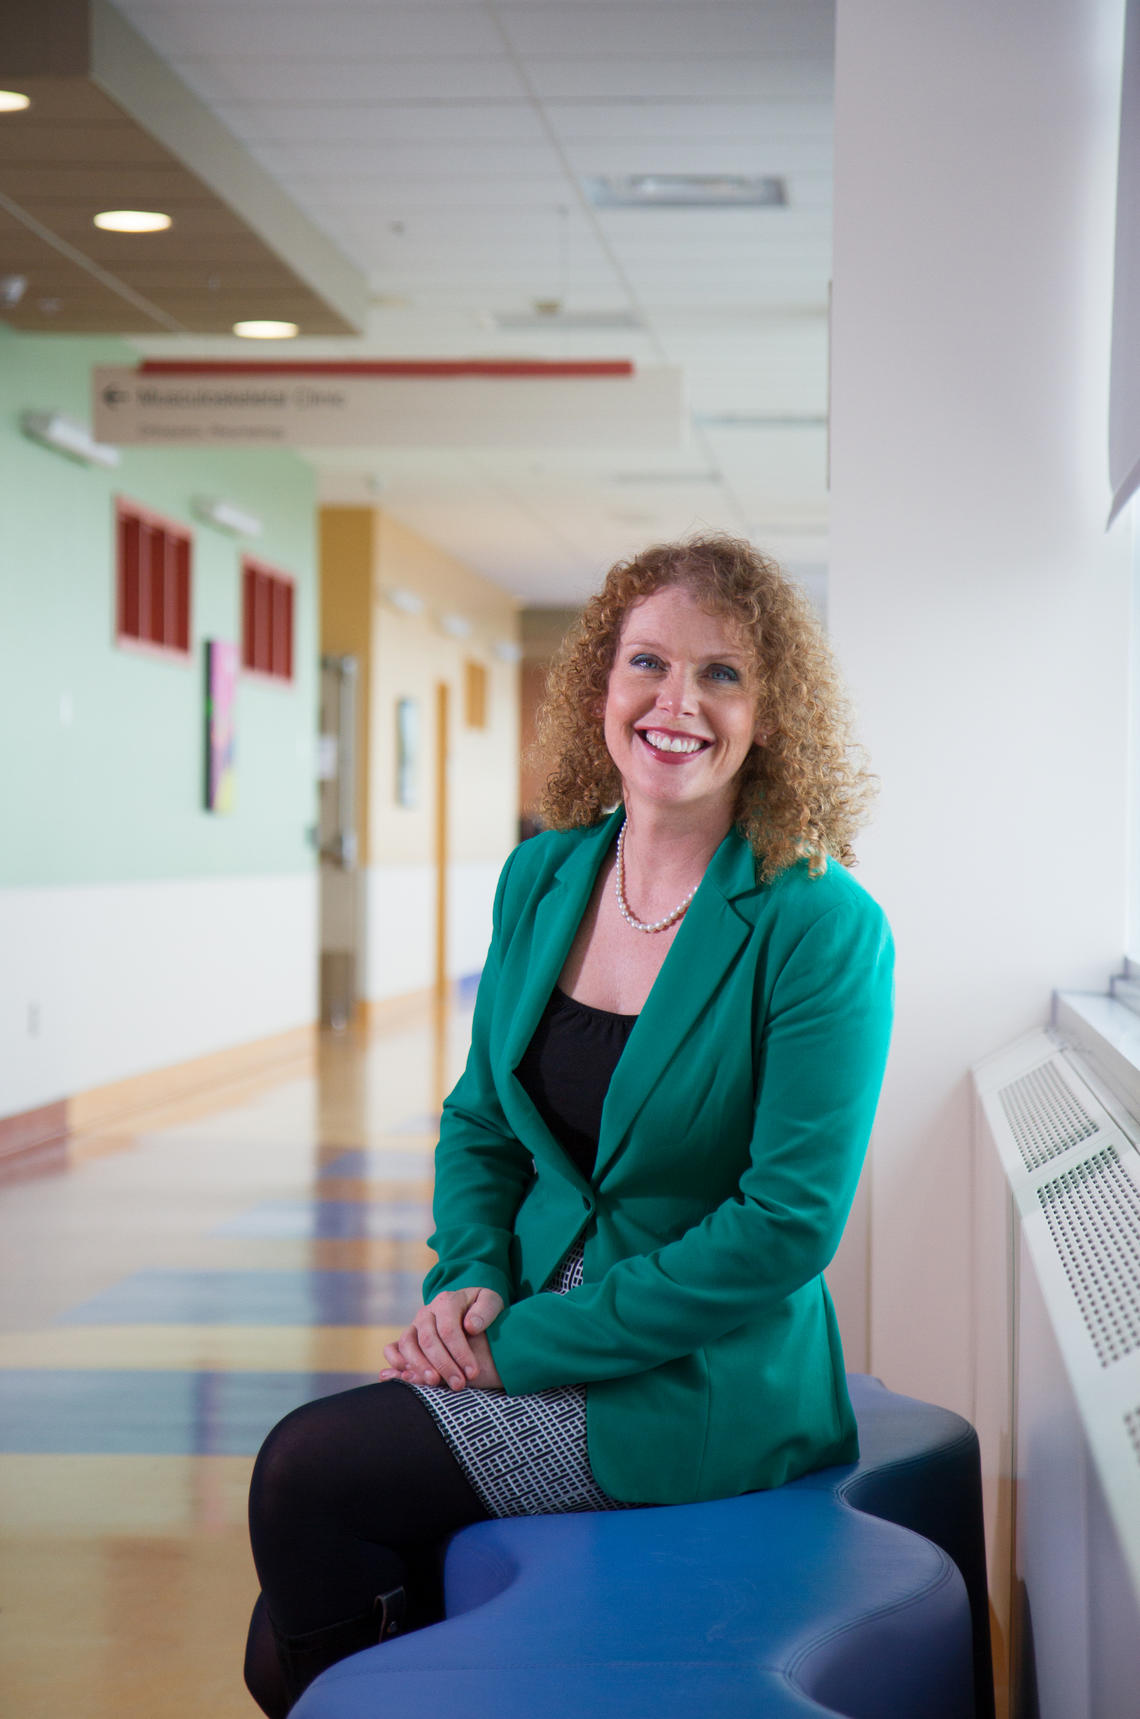 Karen Barlow, associate professor in the departments of pediatrics and clinical neurosciences, is leading the study of melatonin as a treatment for mild concussions in teenagers.